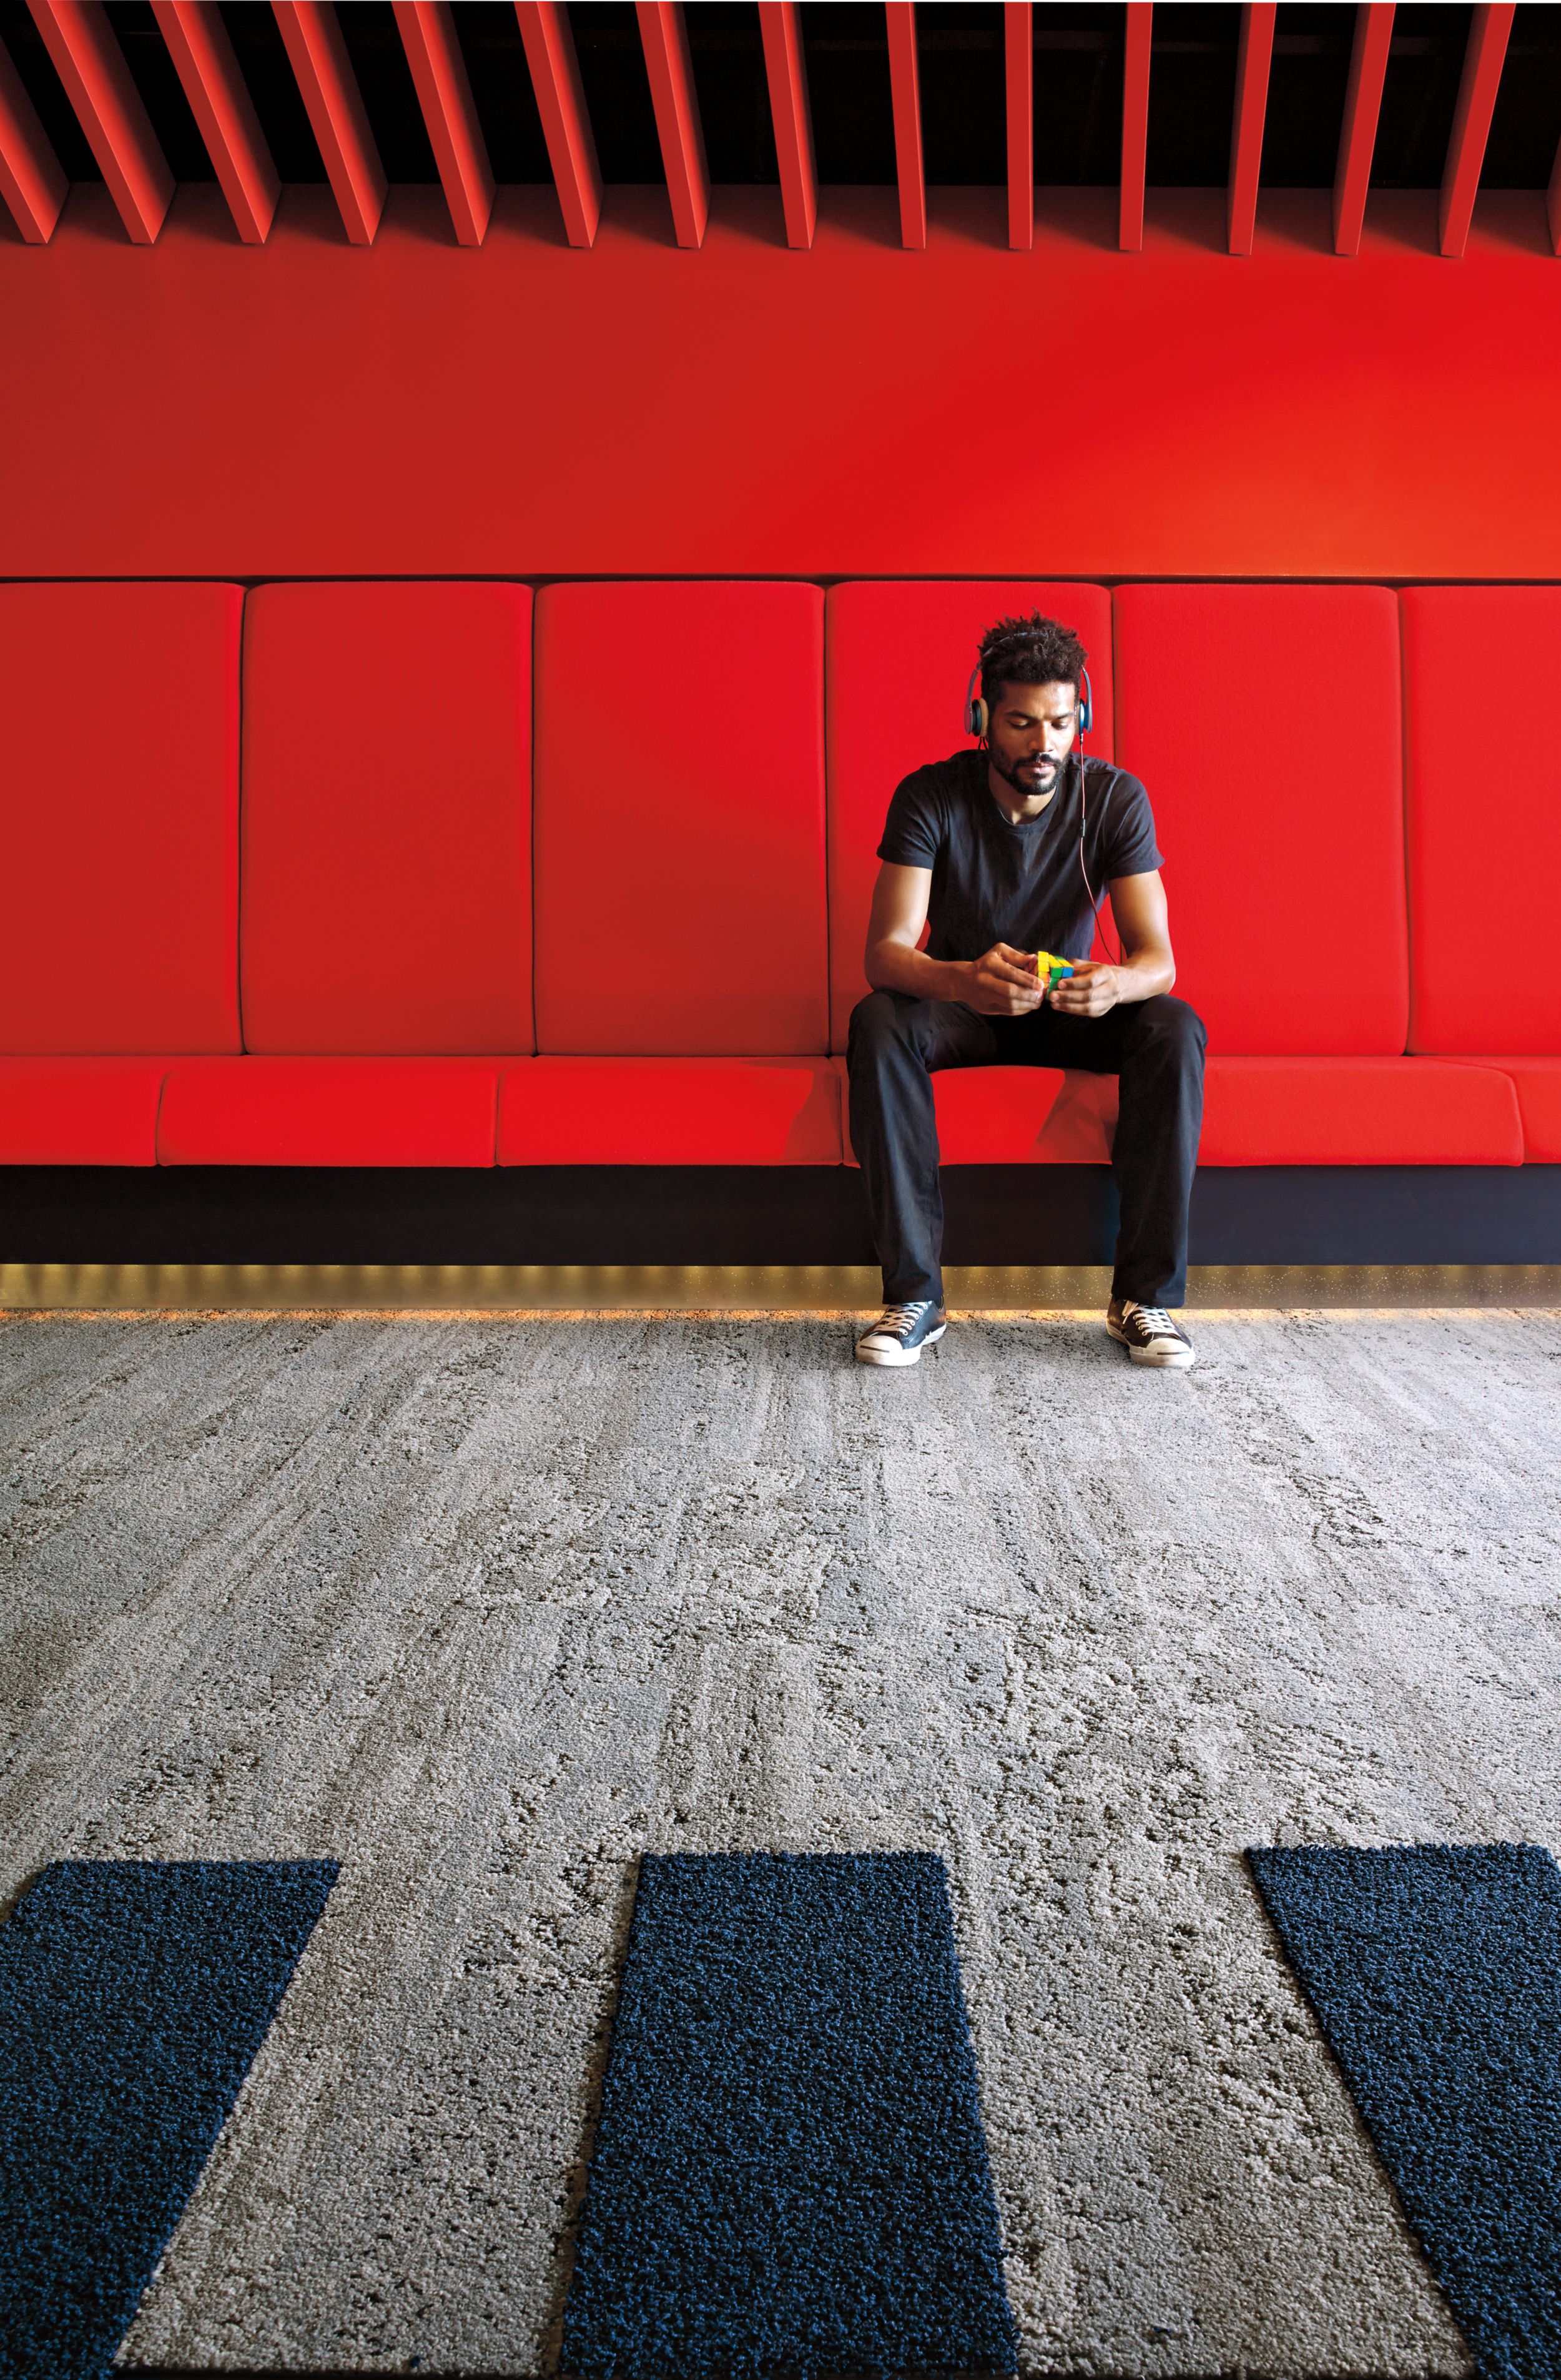 Interface HN810 plank carpet tile in waiting area with red bench and wall and man listening to music número de imagen 3